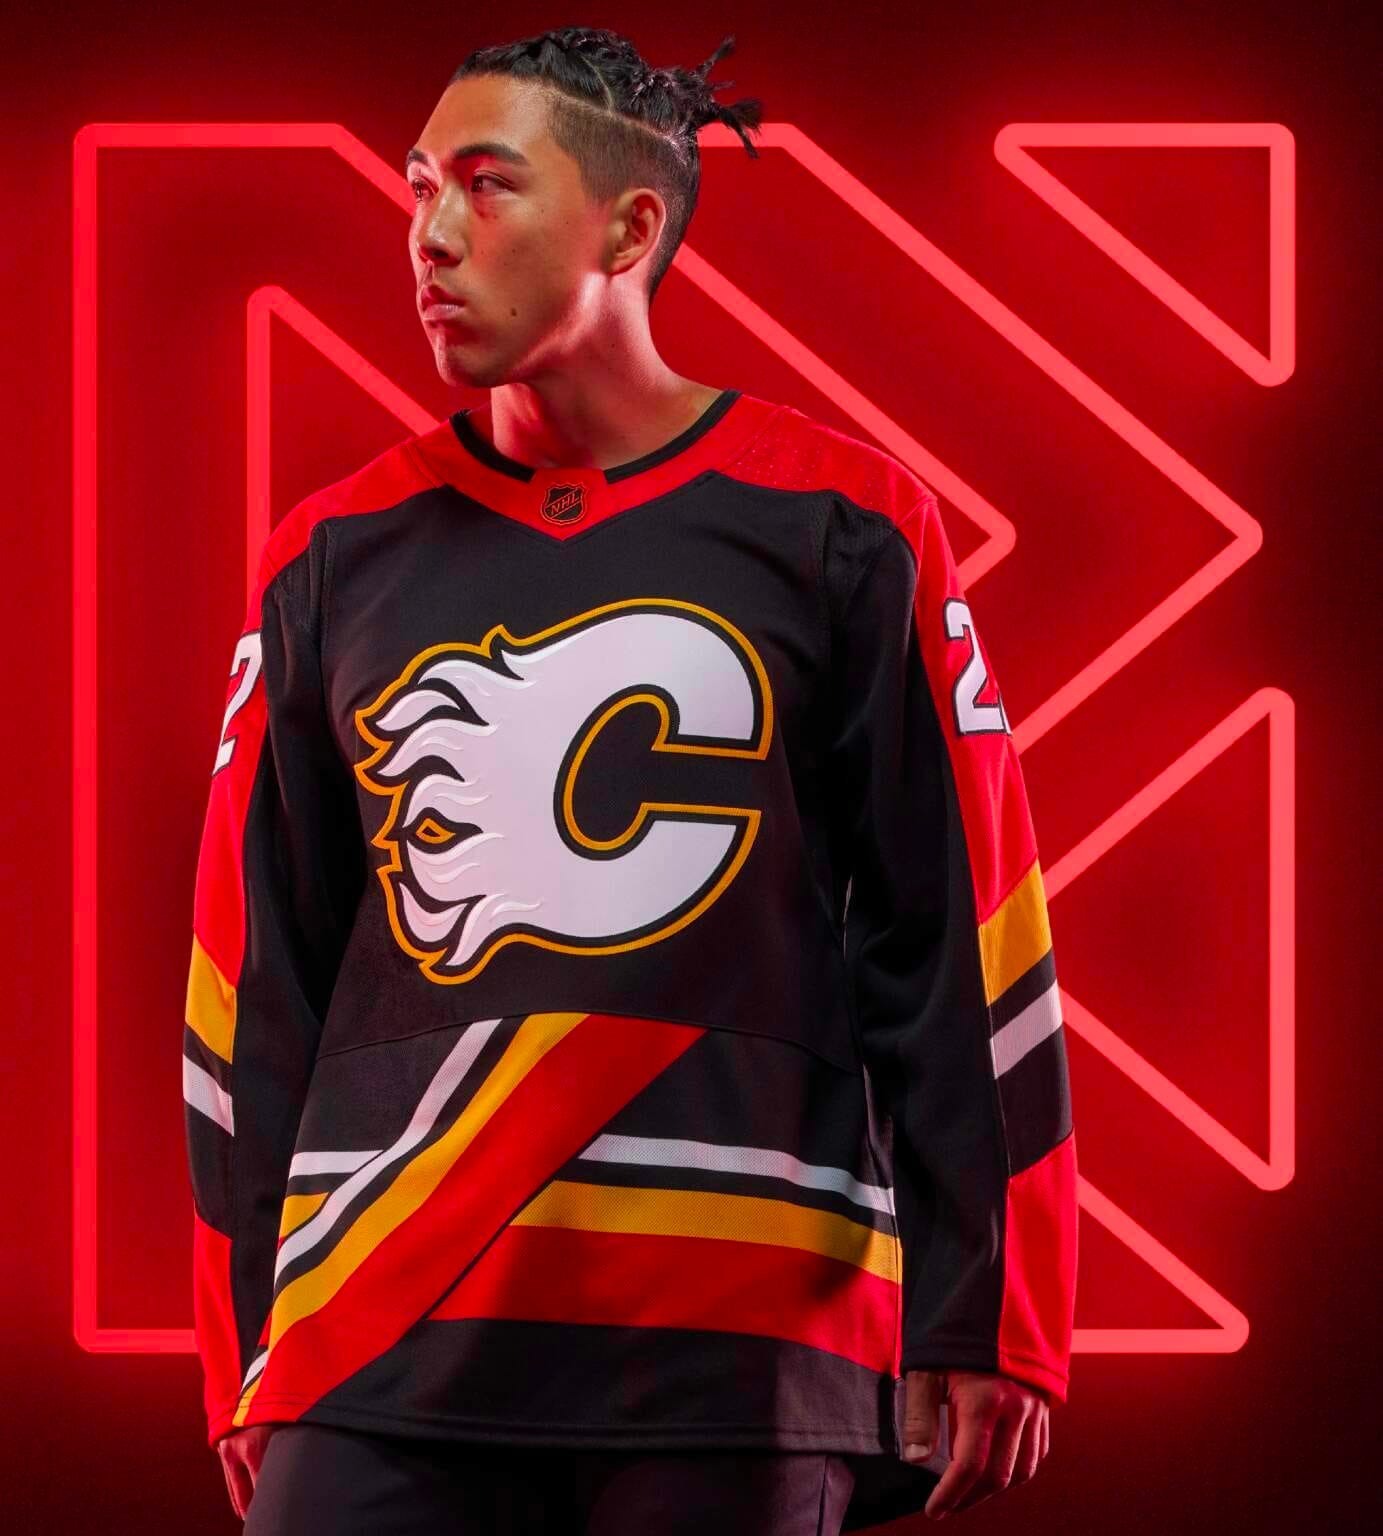 Uni Watch Power Rankings for the NHL's New Reverse Retro Uniforms